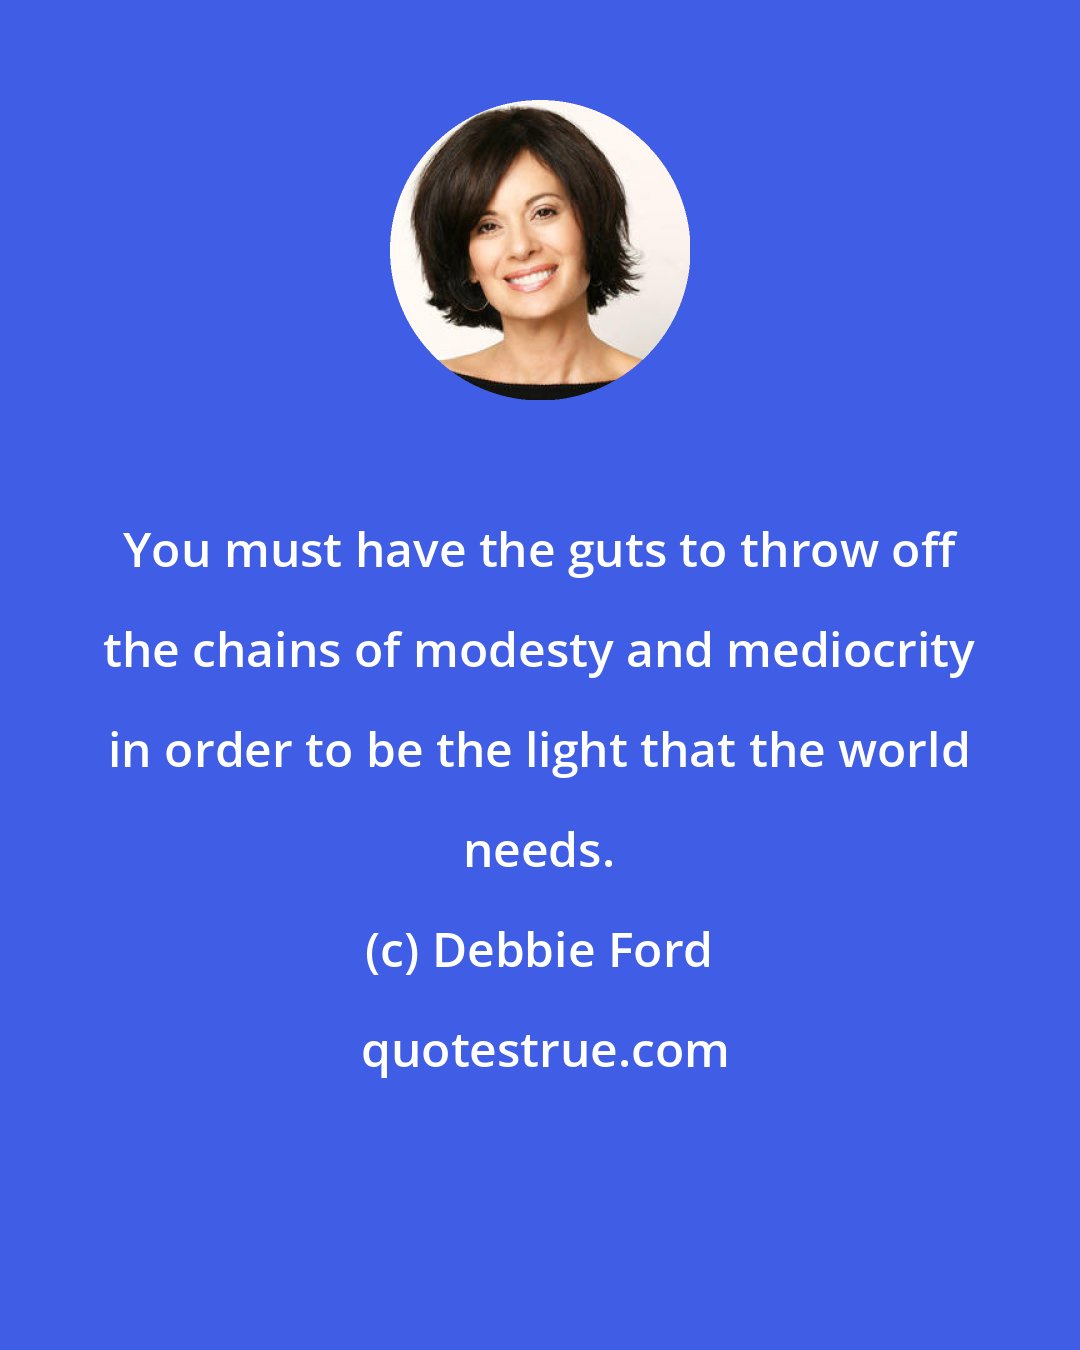 Debbie Ford: You must have the guts to throw off the chains of modesty and mediocrity in order to be the light that the world needs.